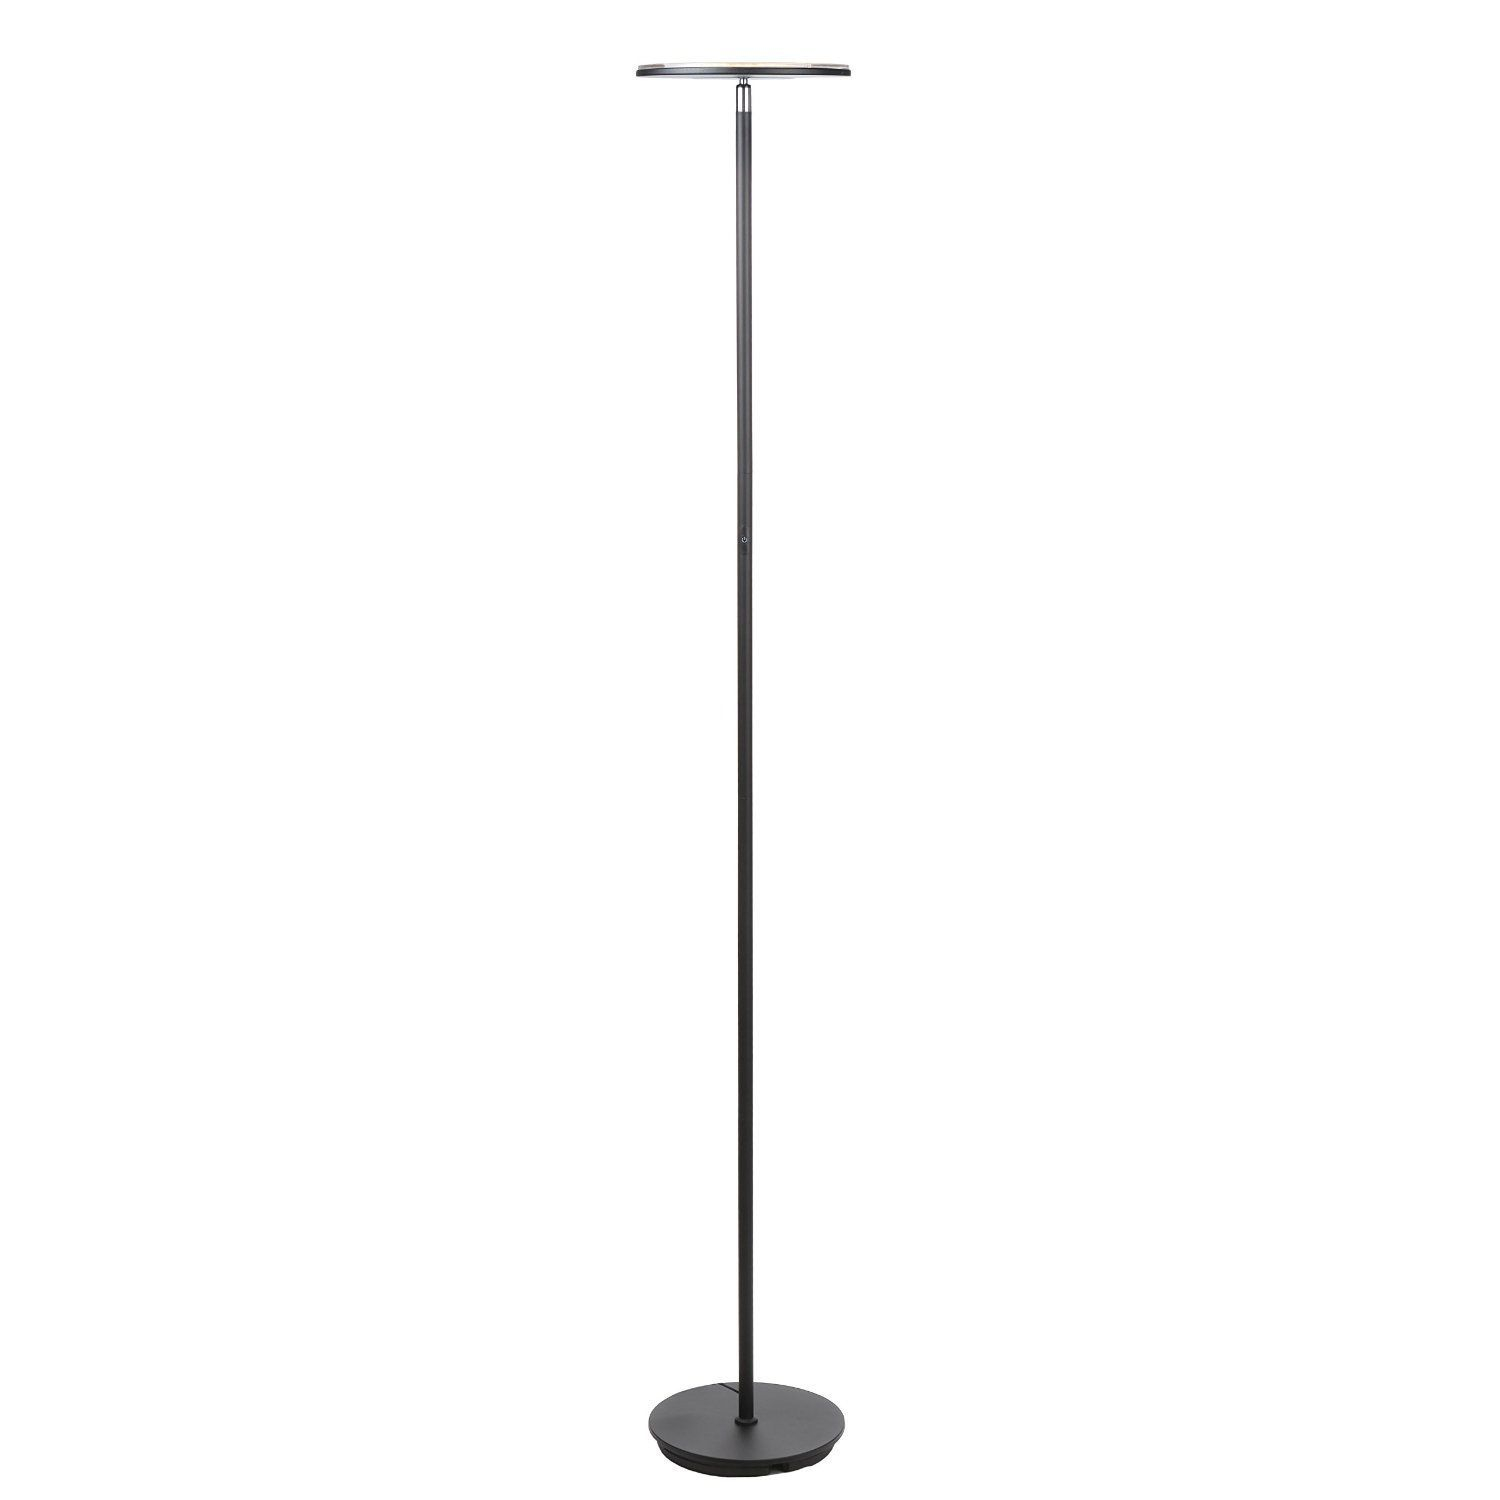 Brightech Sky 30 Flux Edition Led Torchiere Floor Lamp Super Bright pertaining to dimensions 1500 X 1500